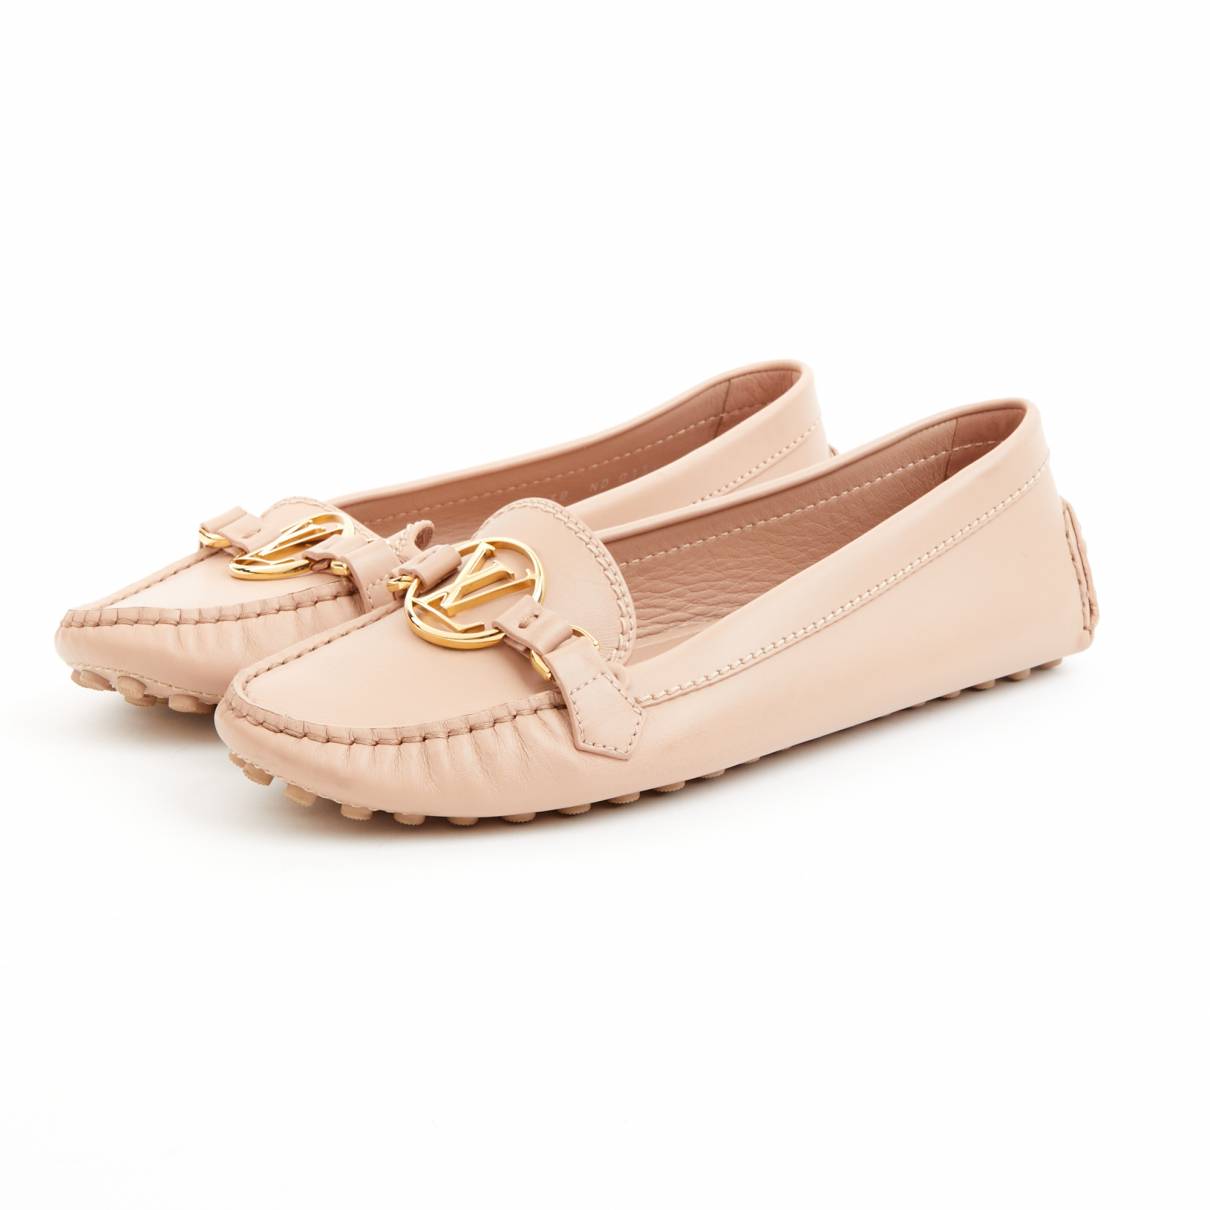 Leather flats Louis Vuitton Pink size 38 EU in Leather - 31888785